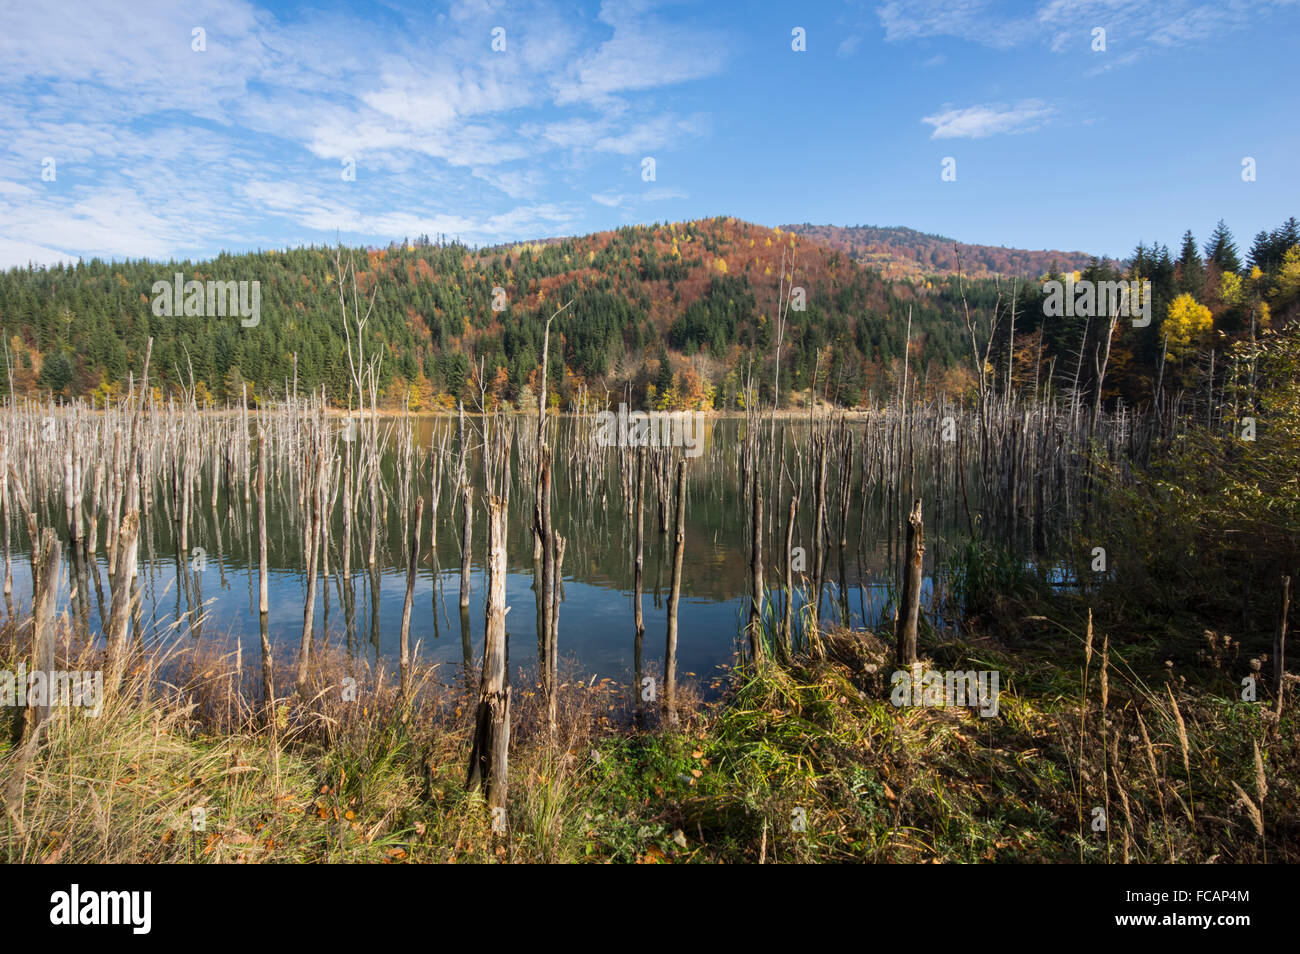 Dead trees in a swamp lake. Cuejdel lake was born 30 years ago (a landfall on river Cuejdel), Today is the biggest dam l Stock Photo